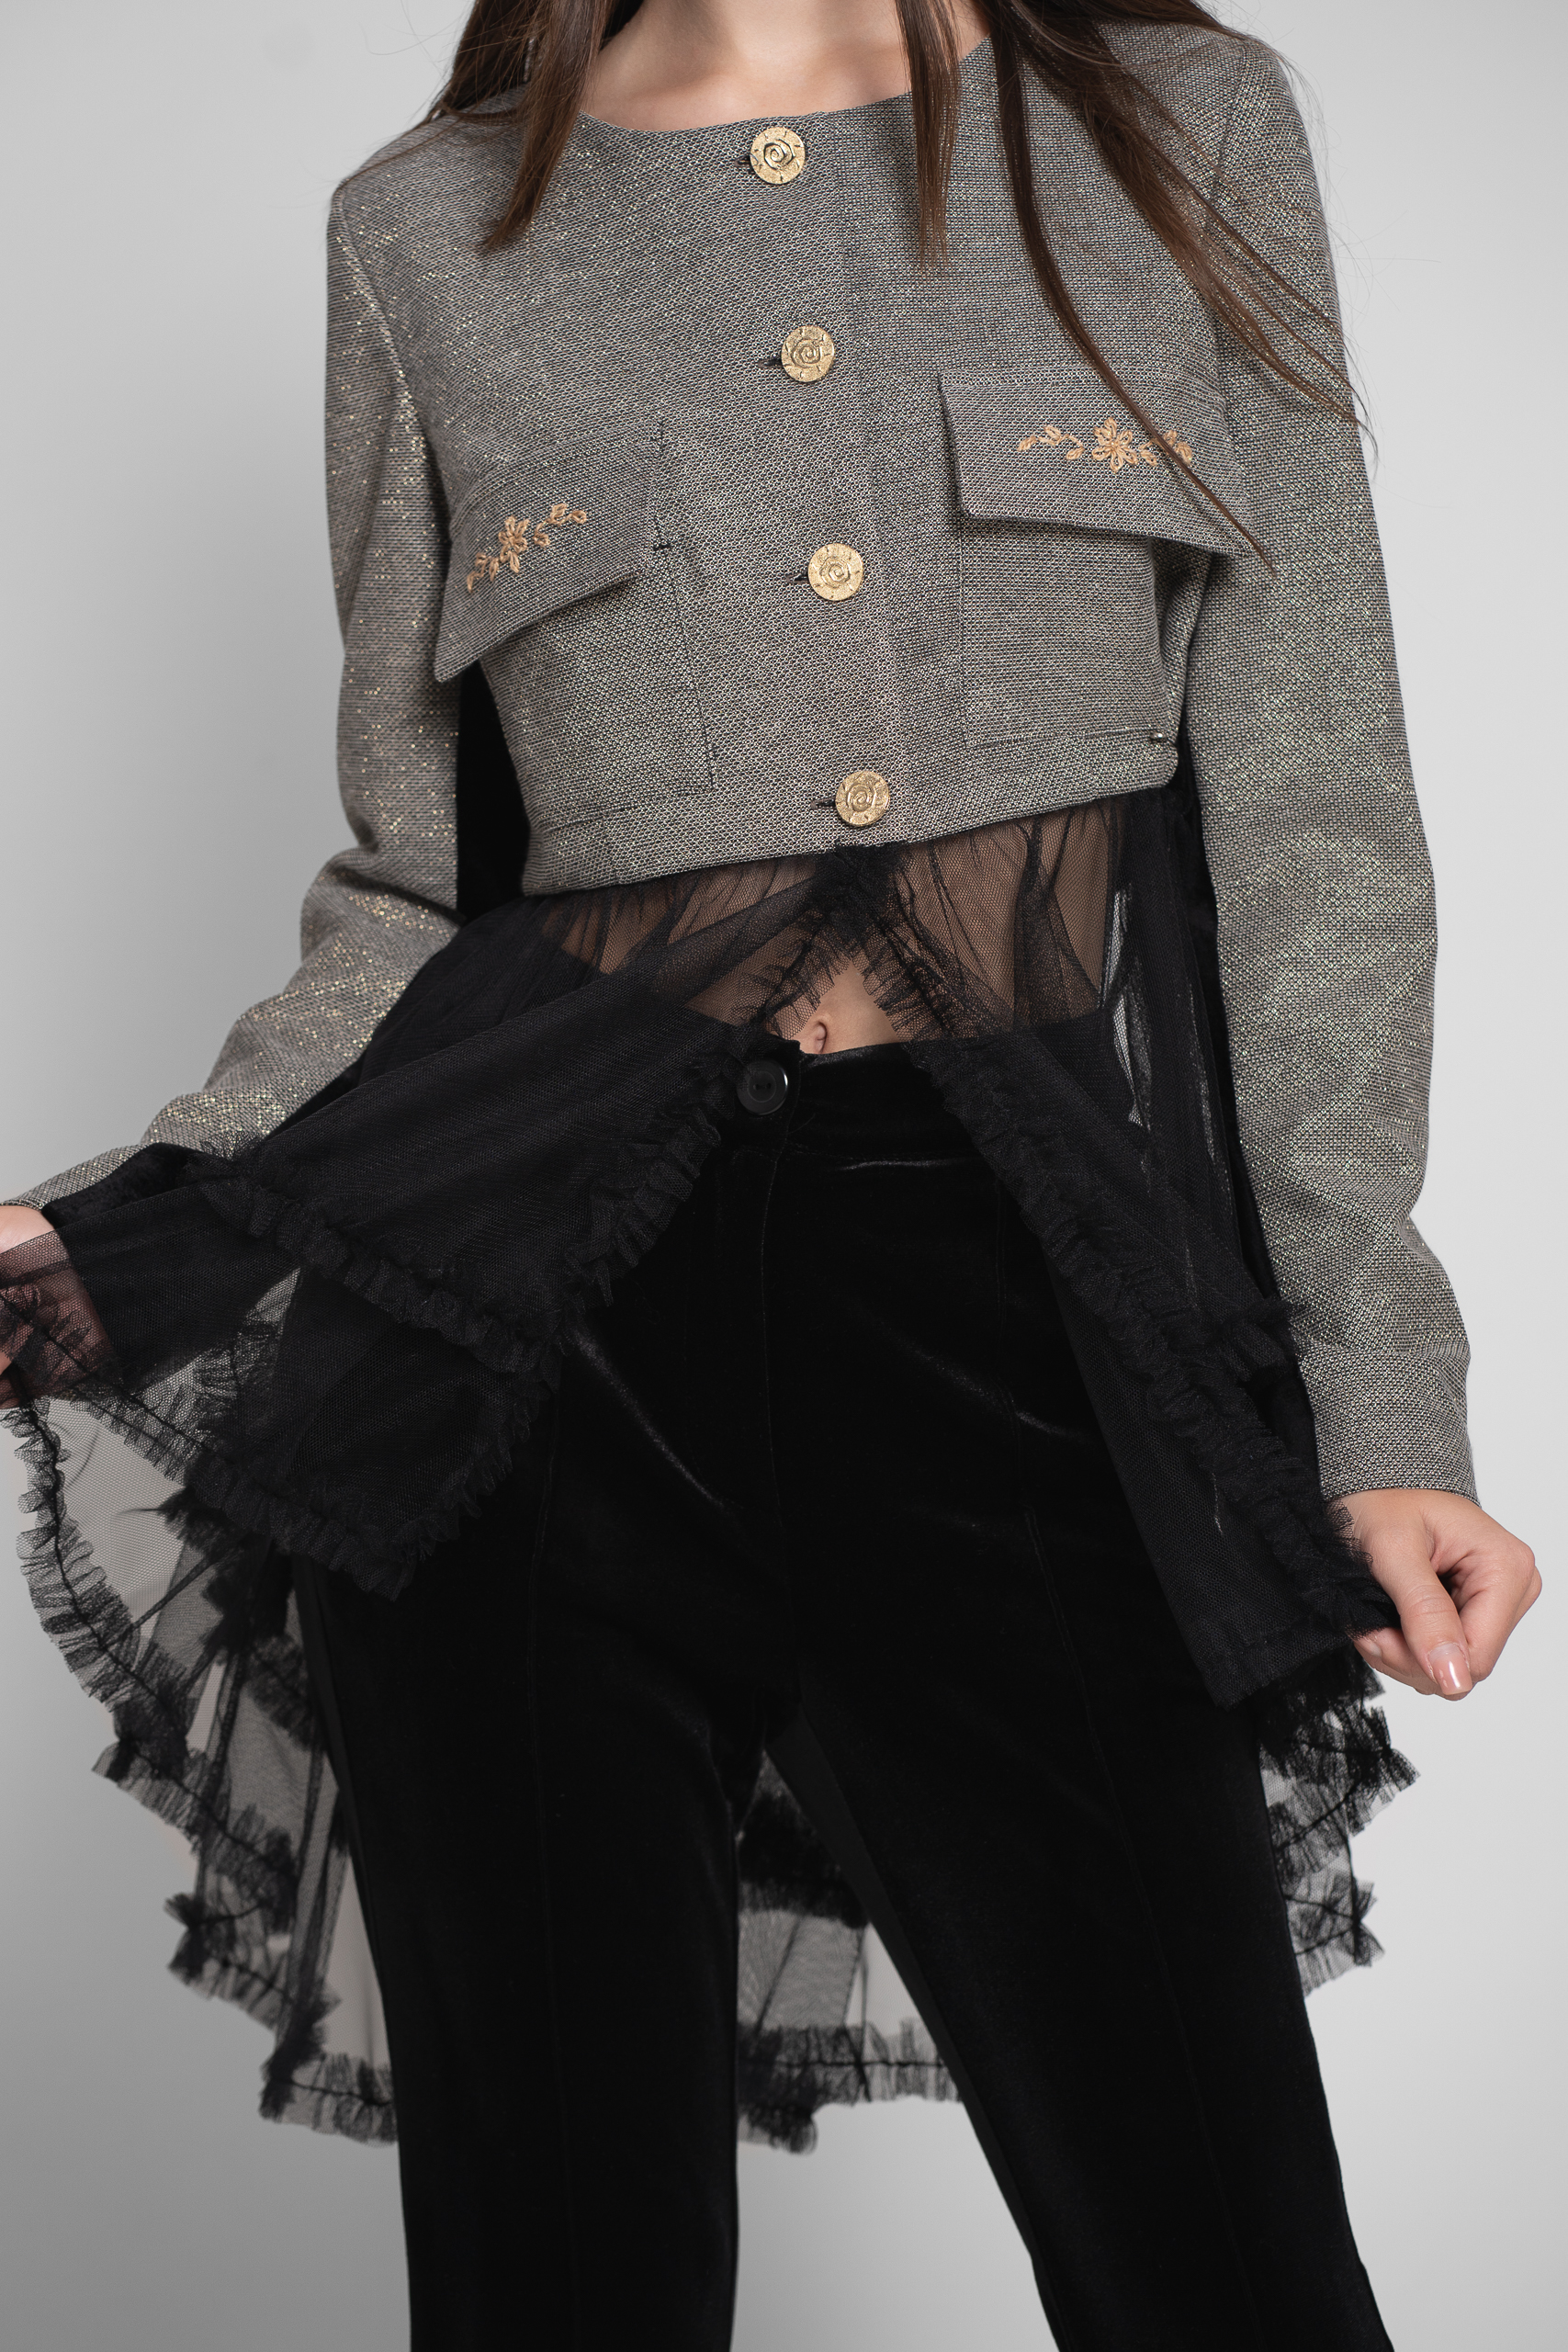 PERRY statement jacket in fabric with black tulle tail. Natural fabrics, original design, handmade embroidery